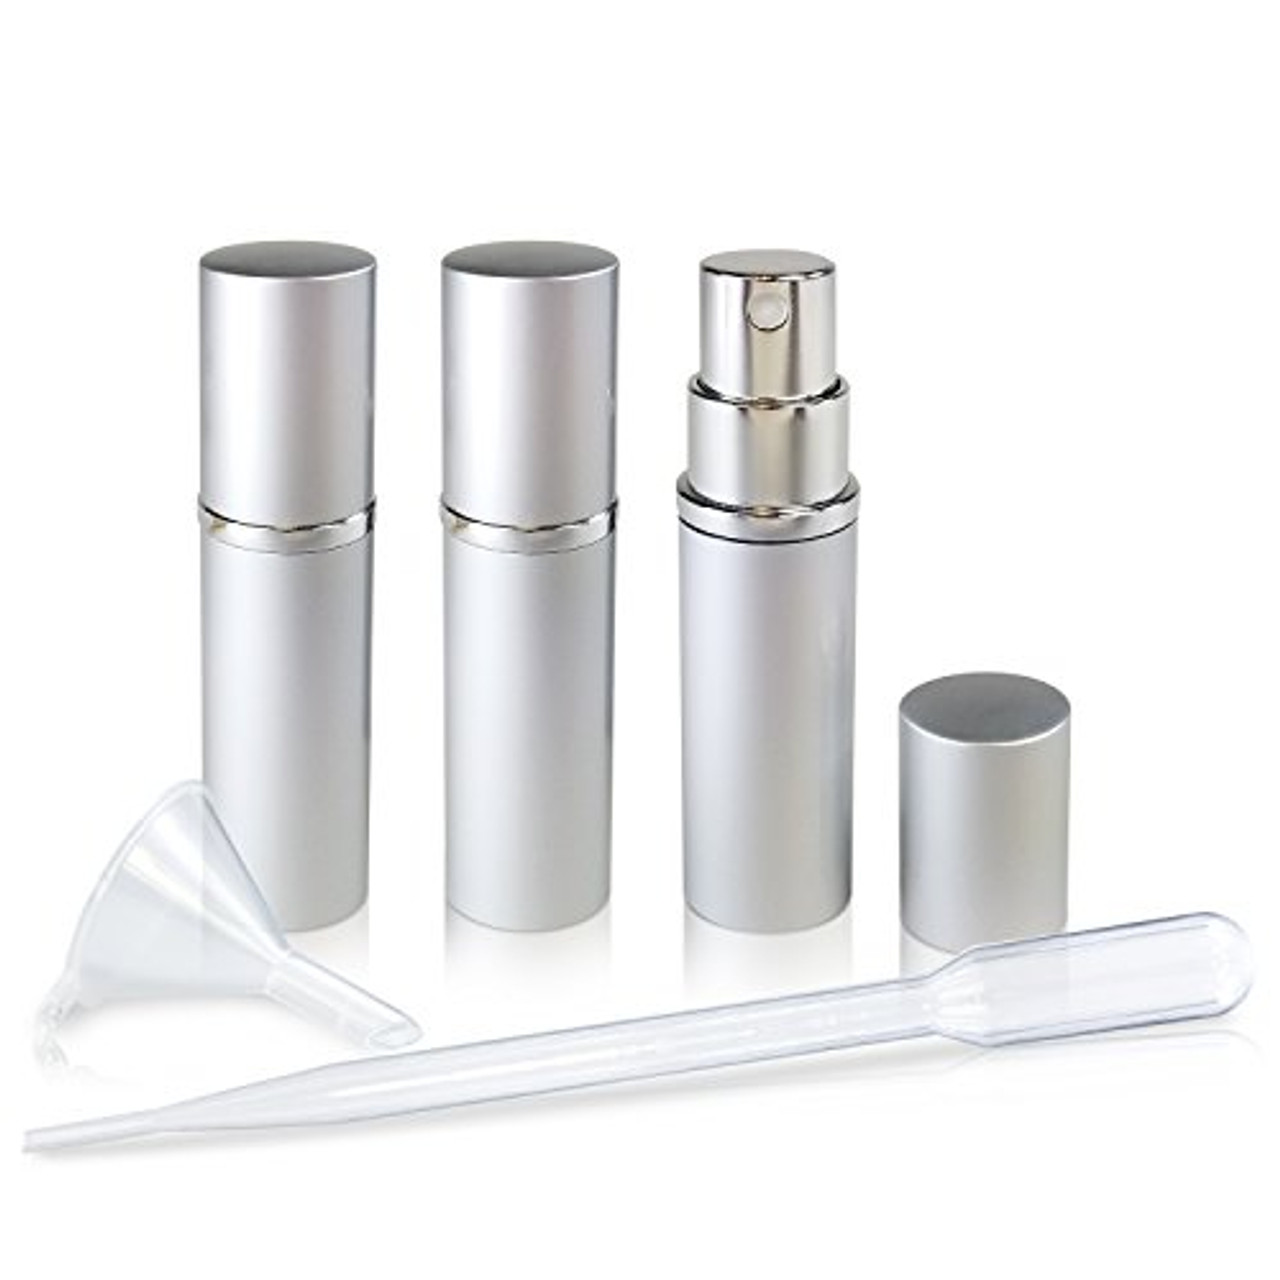 Refillable Perfume Atomizers - The Perfect Travel Perfume Bottle!